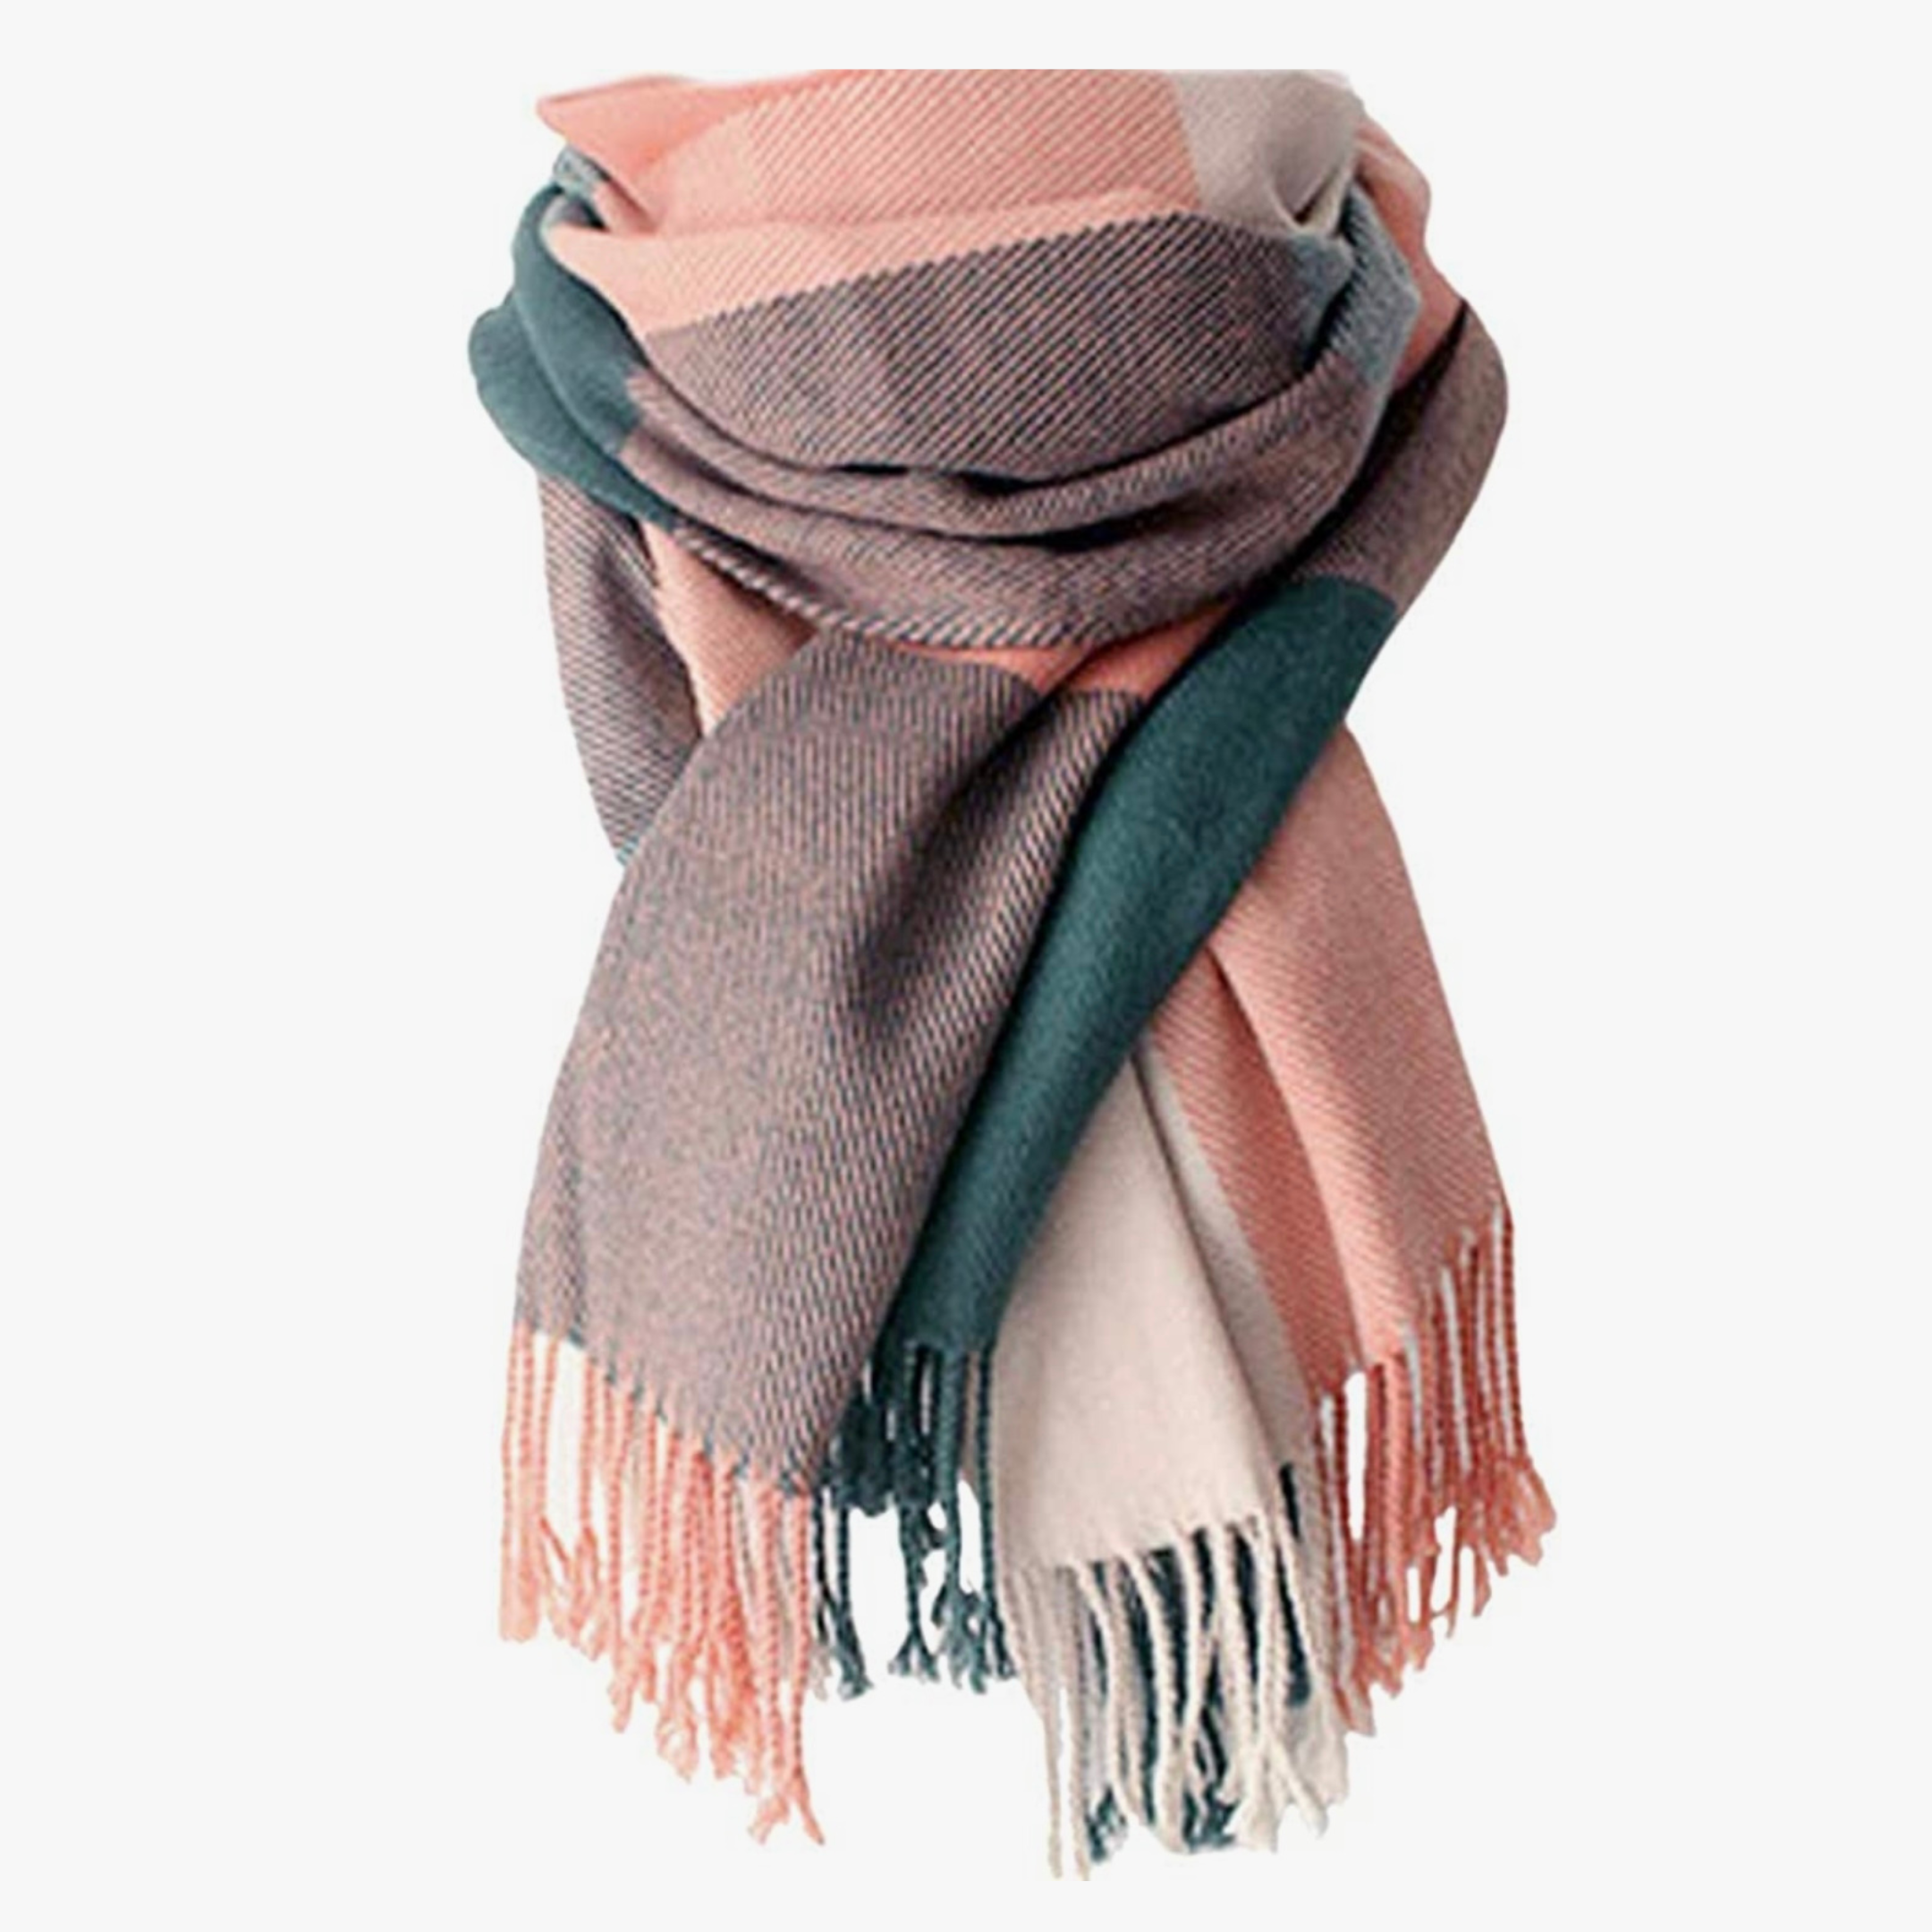 Add our Favorite Fall Scarves to your Wardrobe this Season